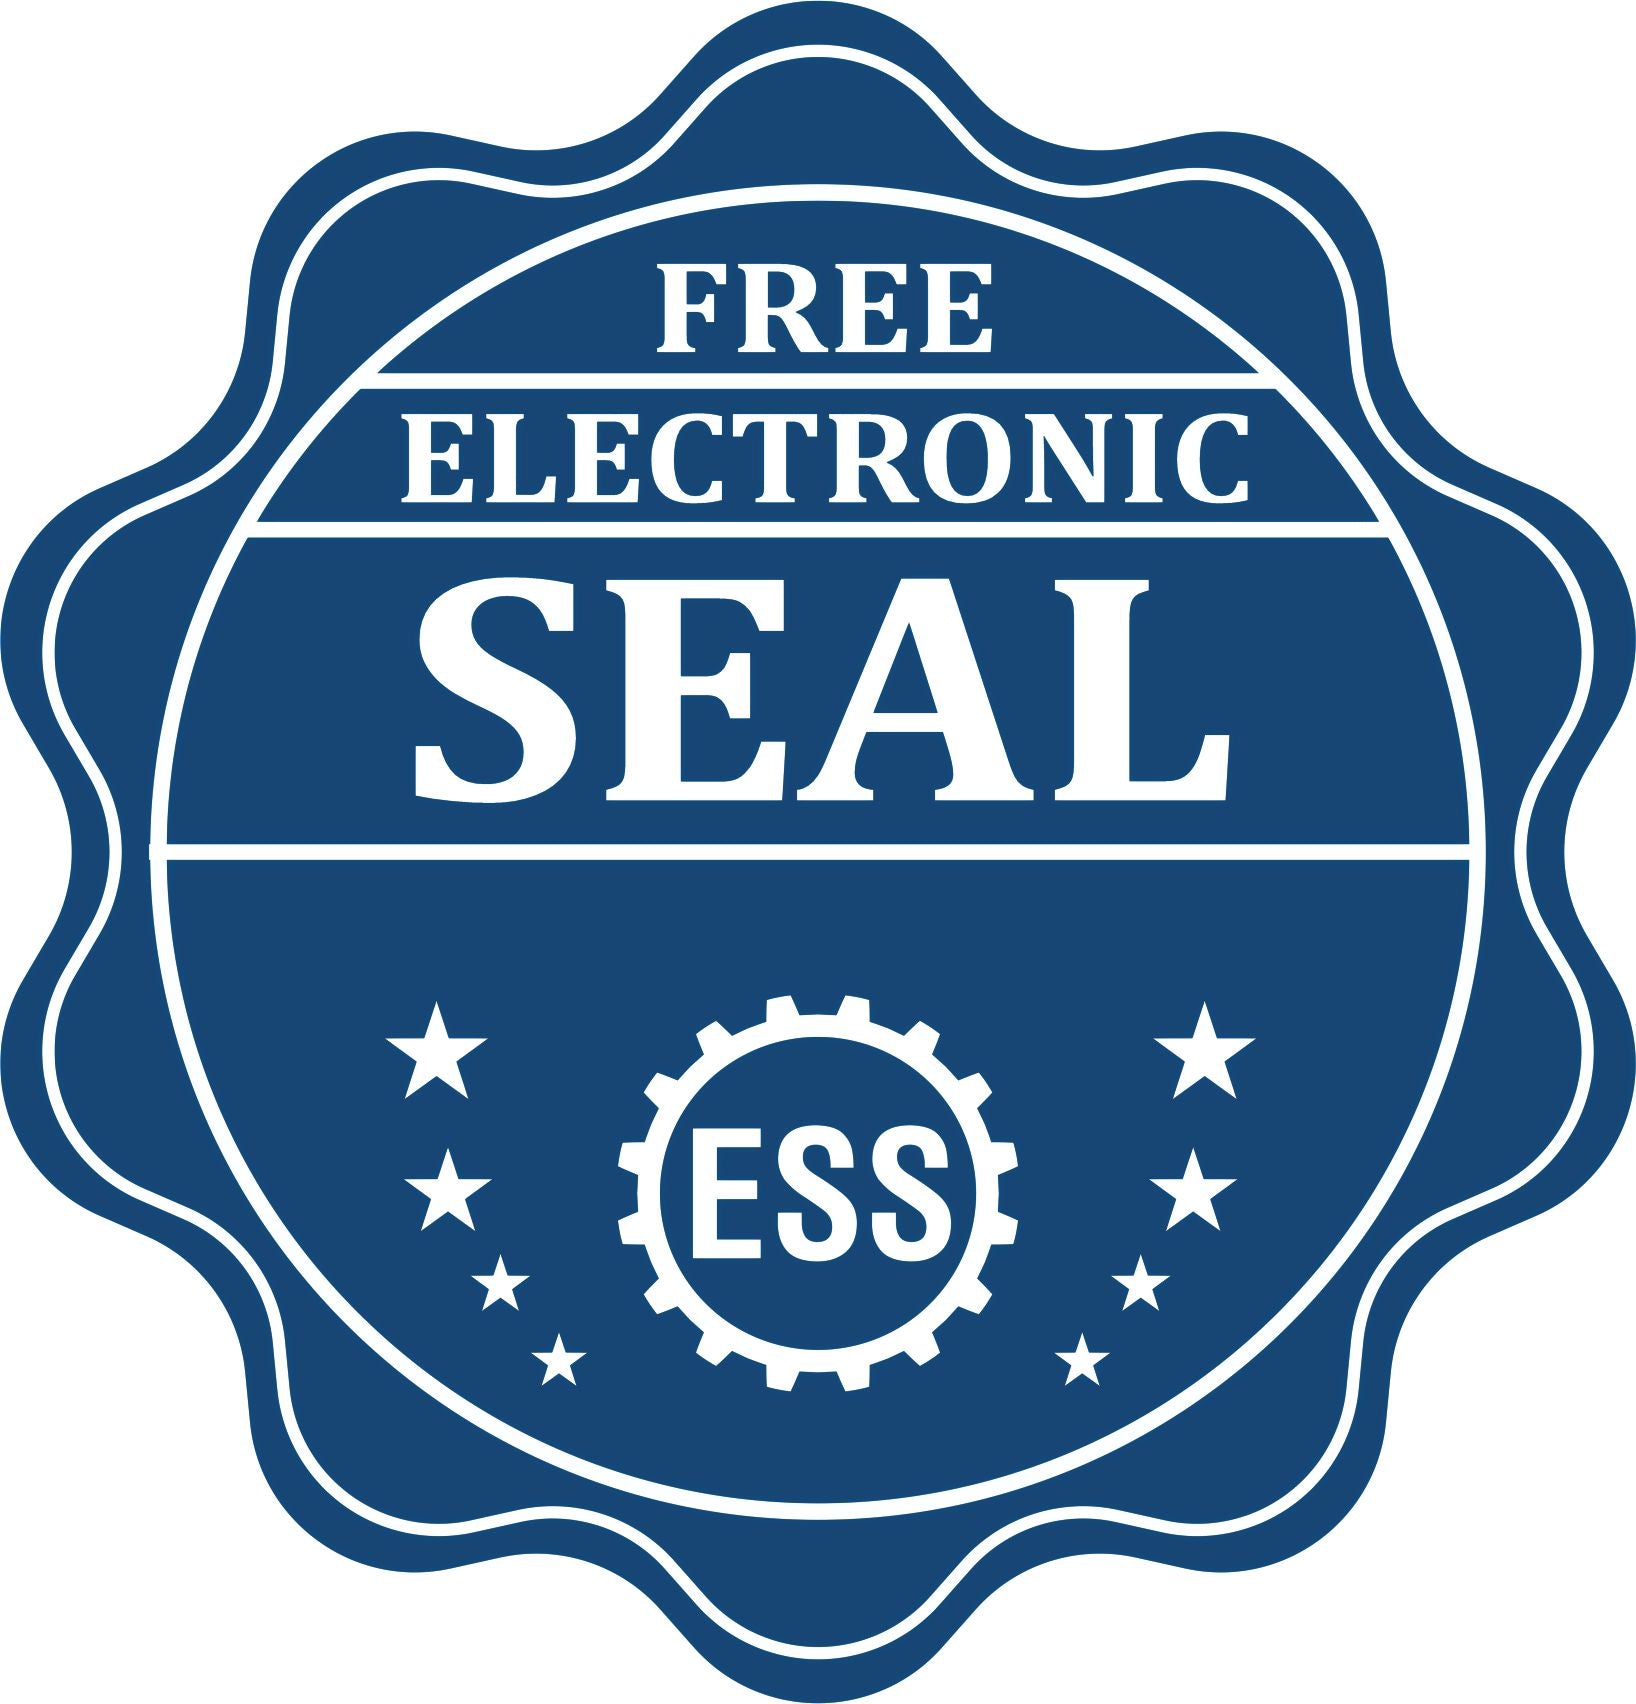 A badge showing a free electronic seal for the Hybrid Arkansas Land Surveyor Seal with stars and the ESS gear on the emblem.